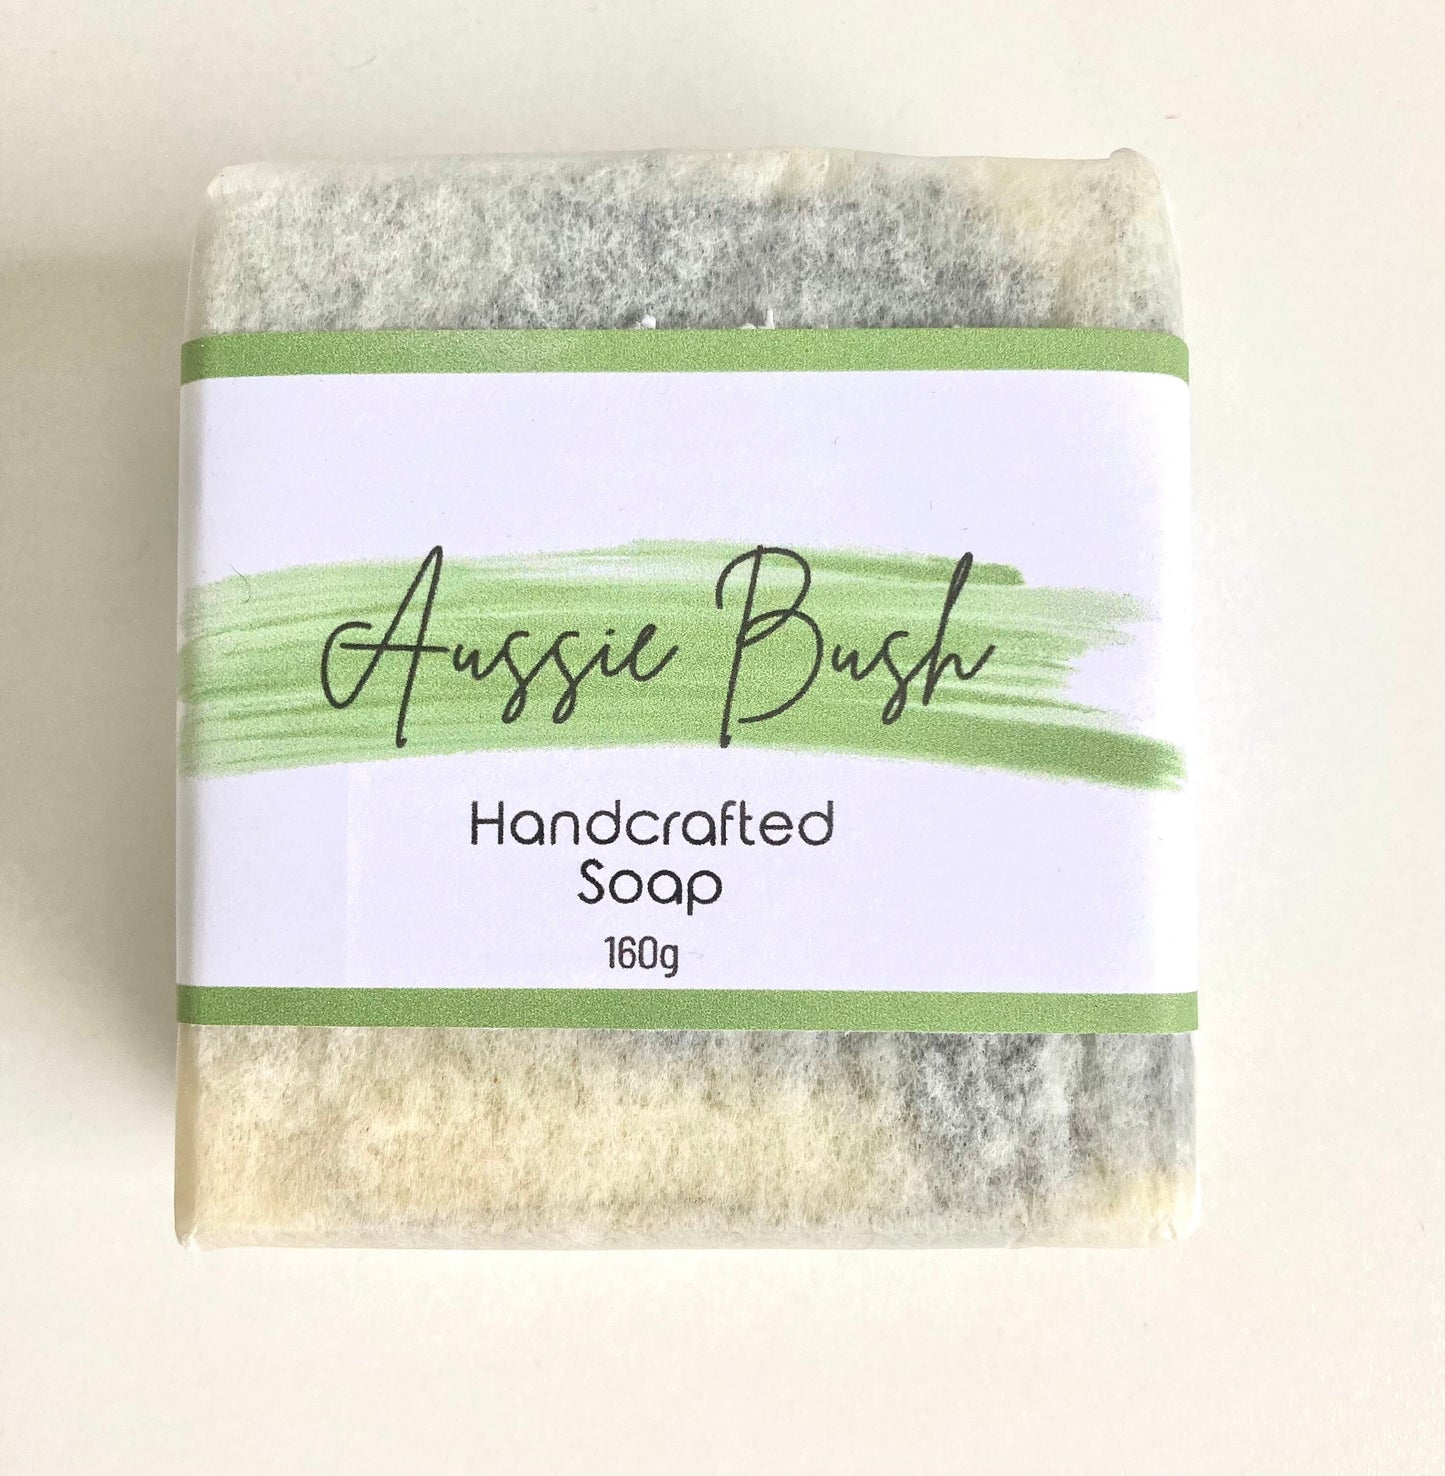 Scented Handmade Soap, Aussie Bush scented soaps